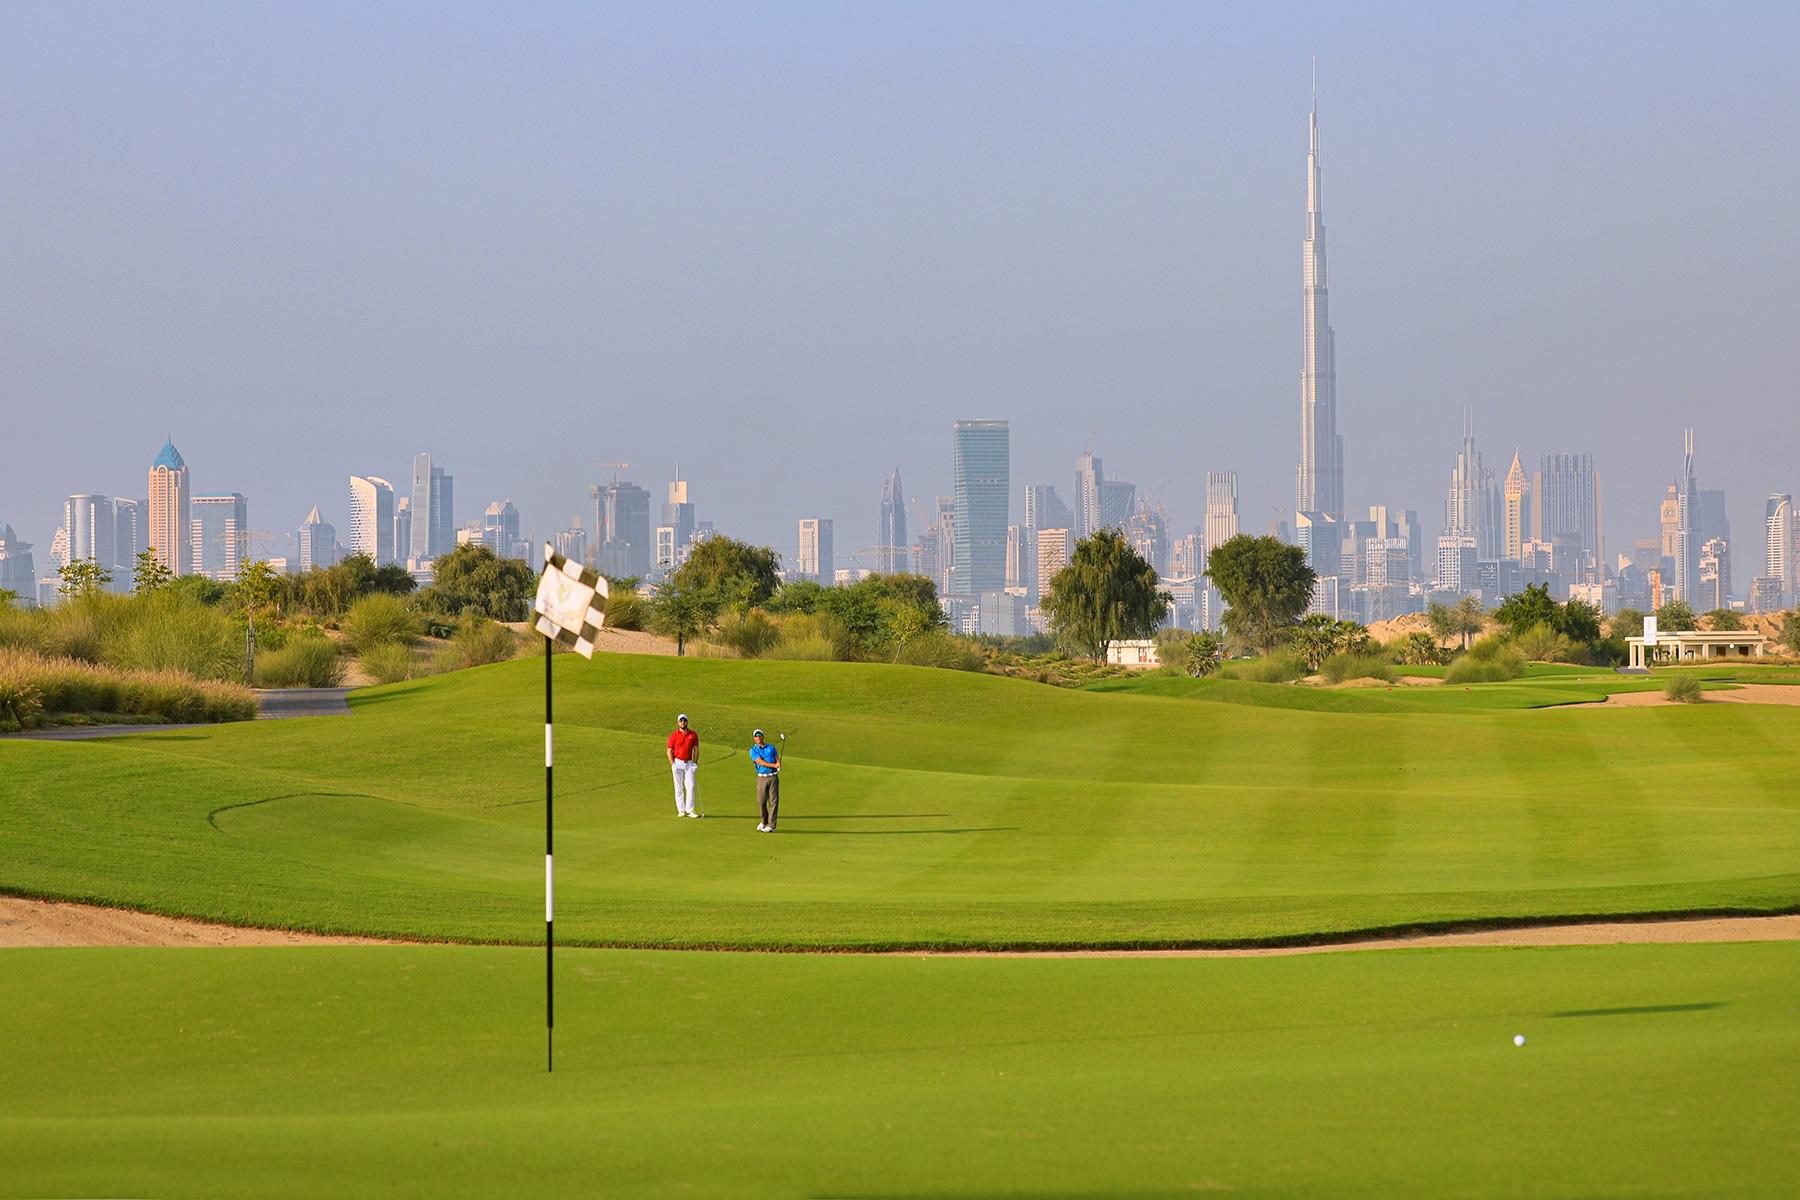 Championship Golf Course - Challenge Yourself | Green Fees - Great Golf  Course Prices - Dubai Hills Golf Club